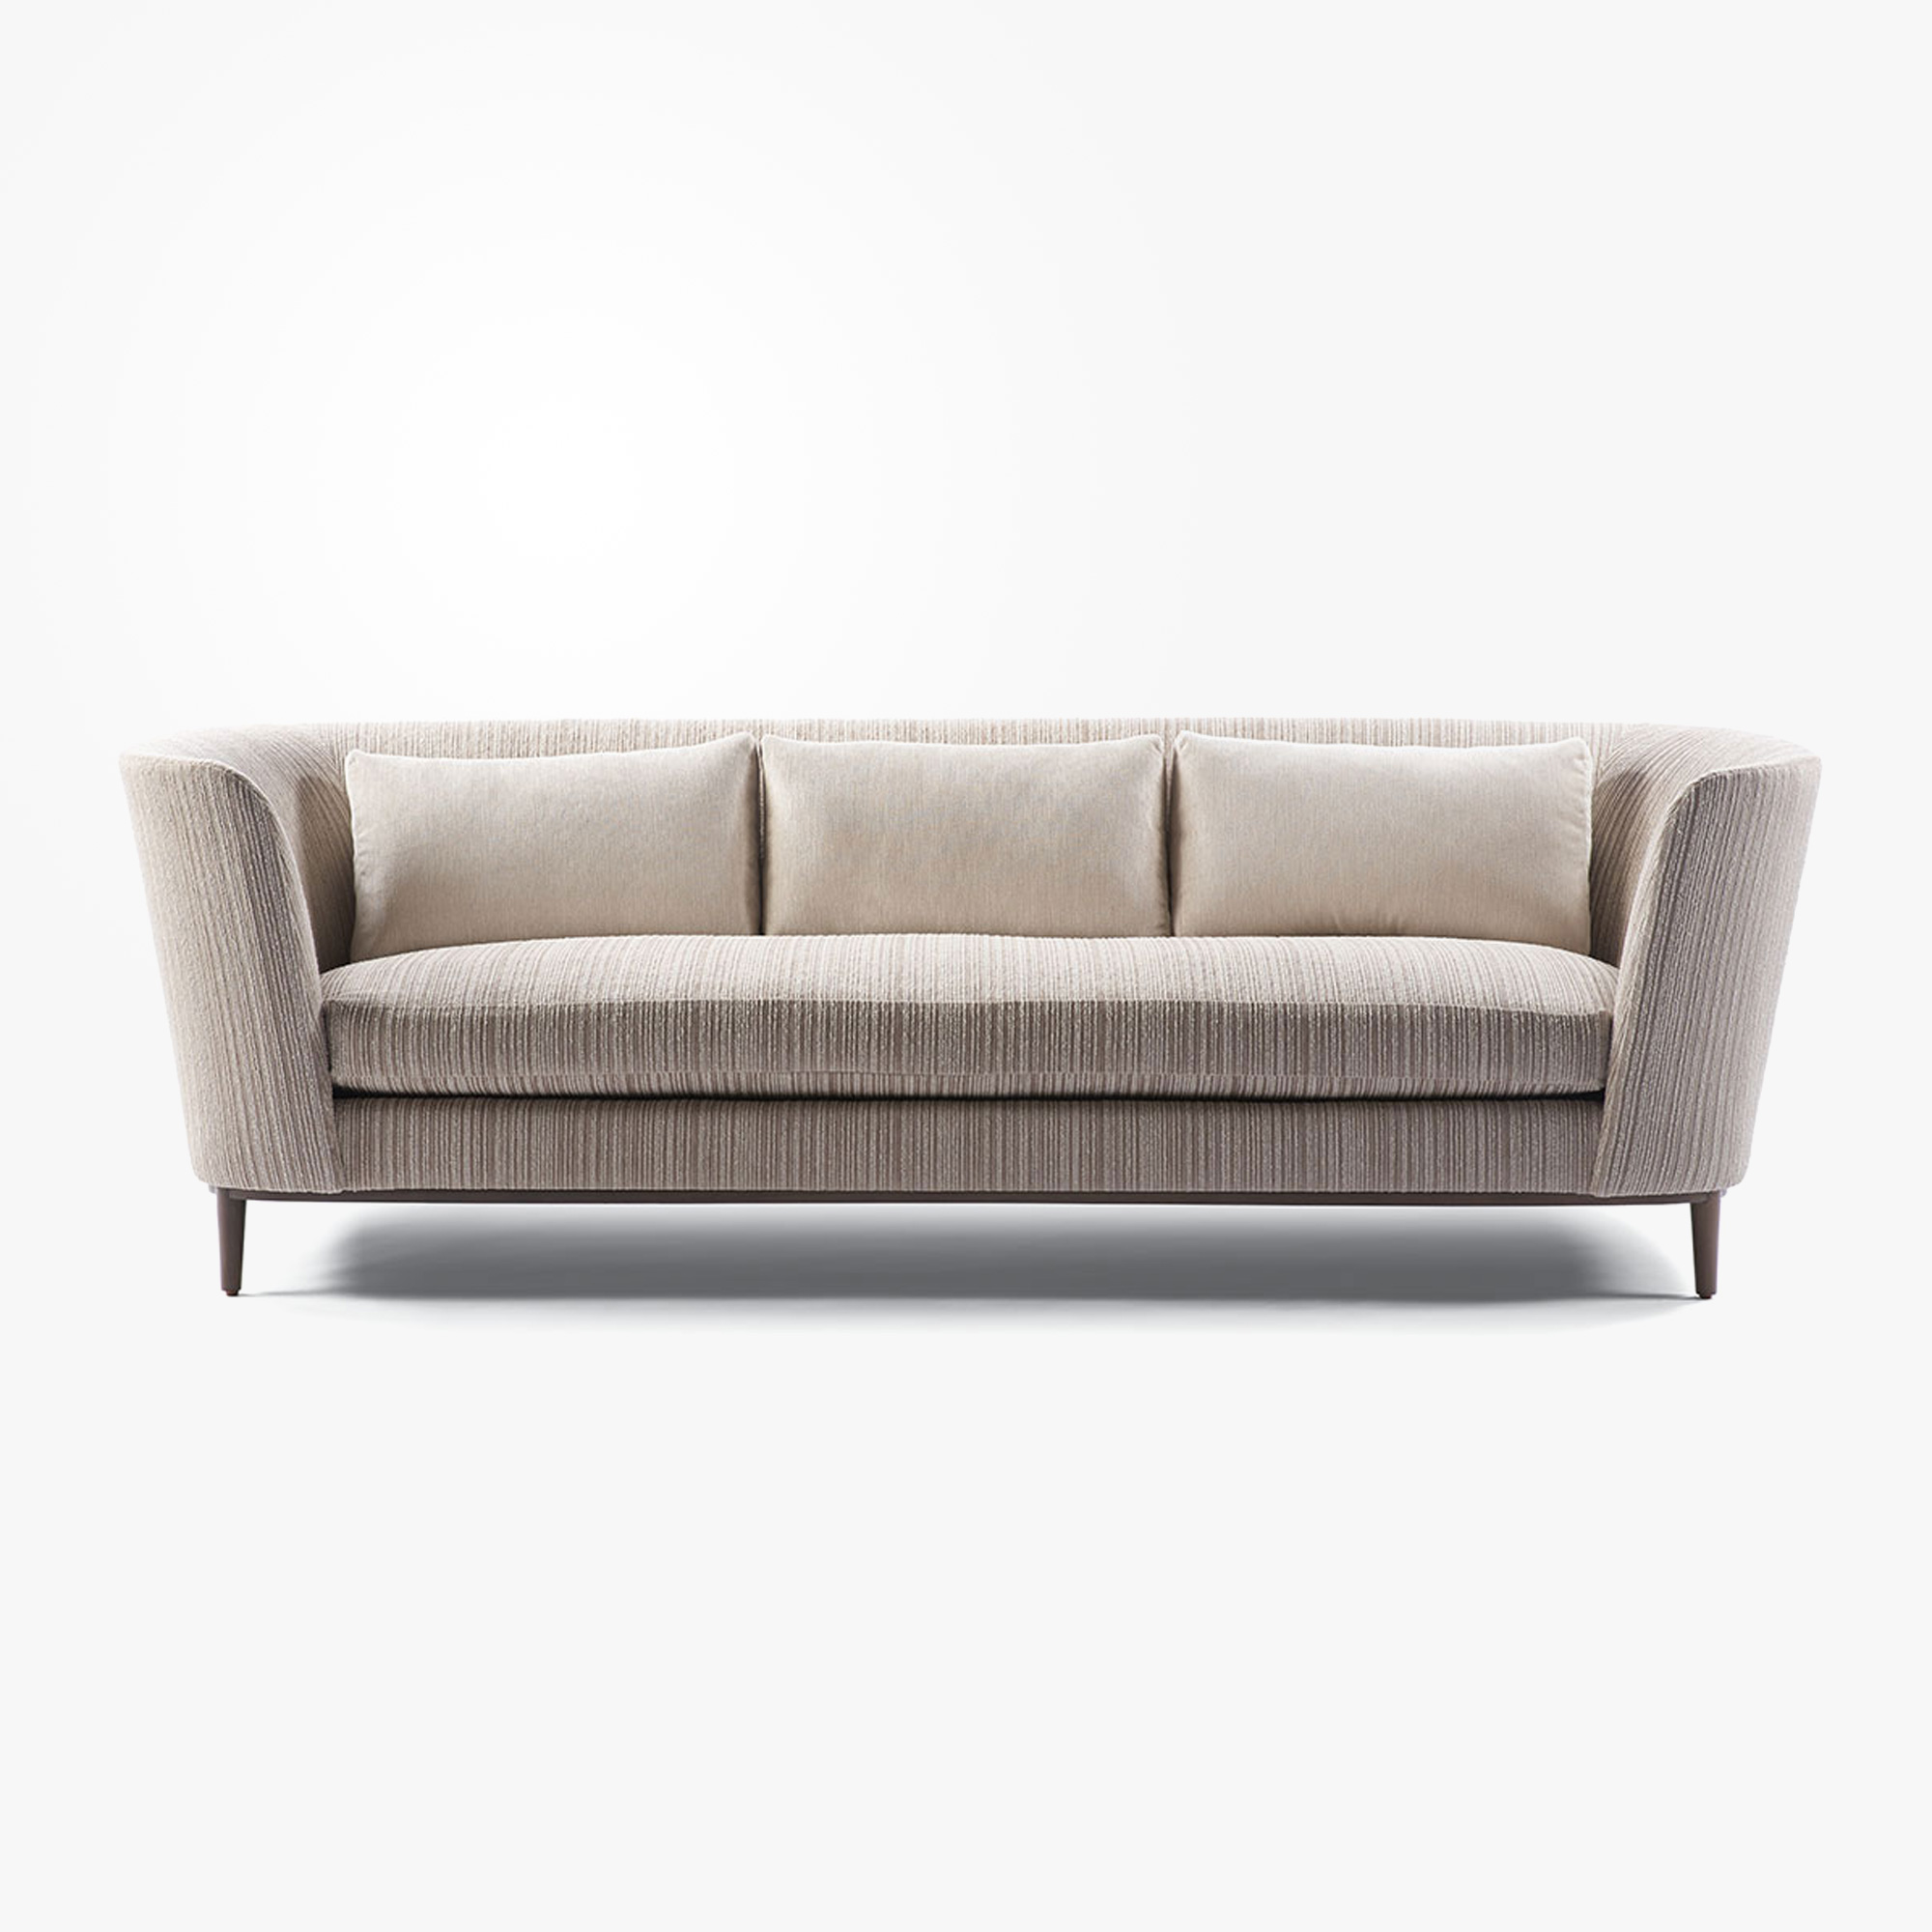 Autumn in Sherpa Pattern Encore Fully Upholstered Sofa 